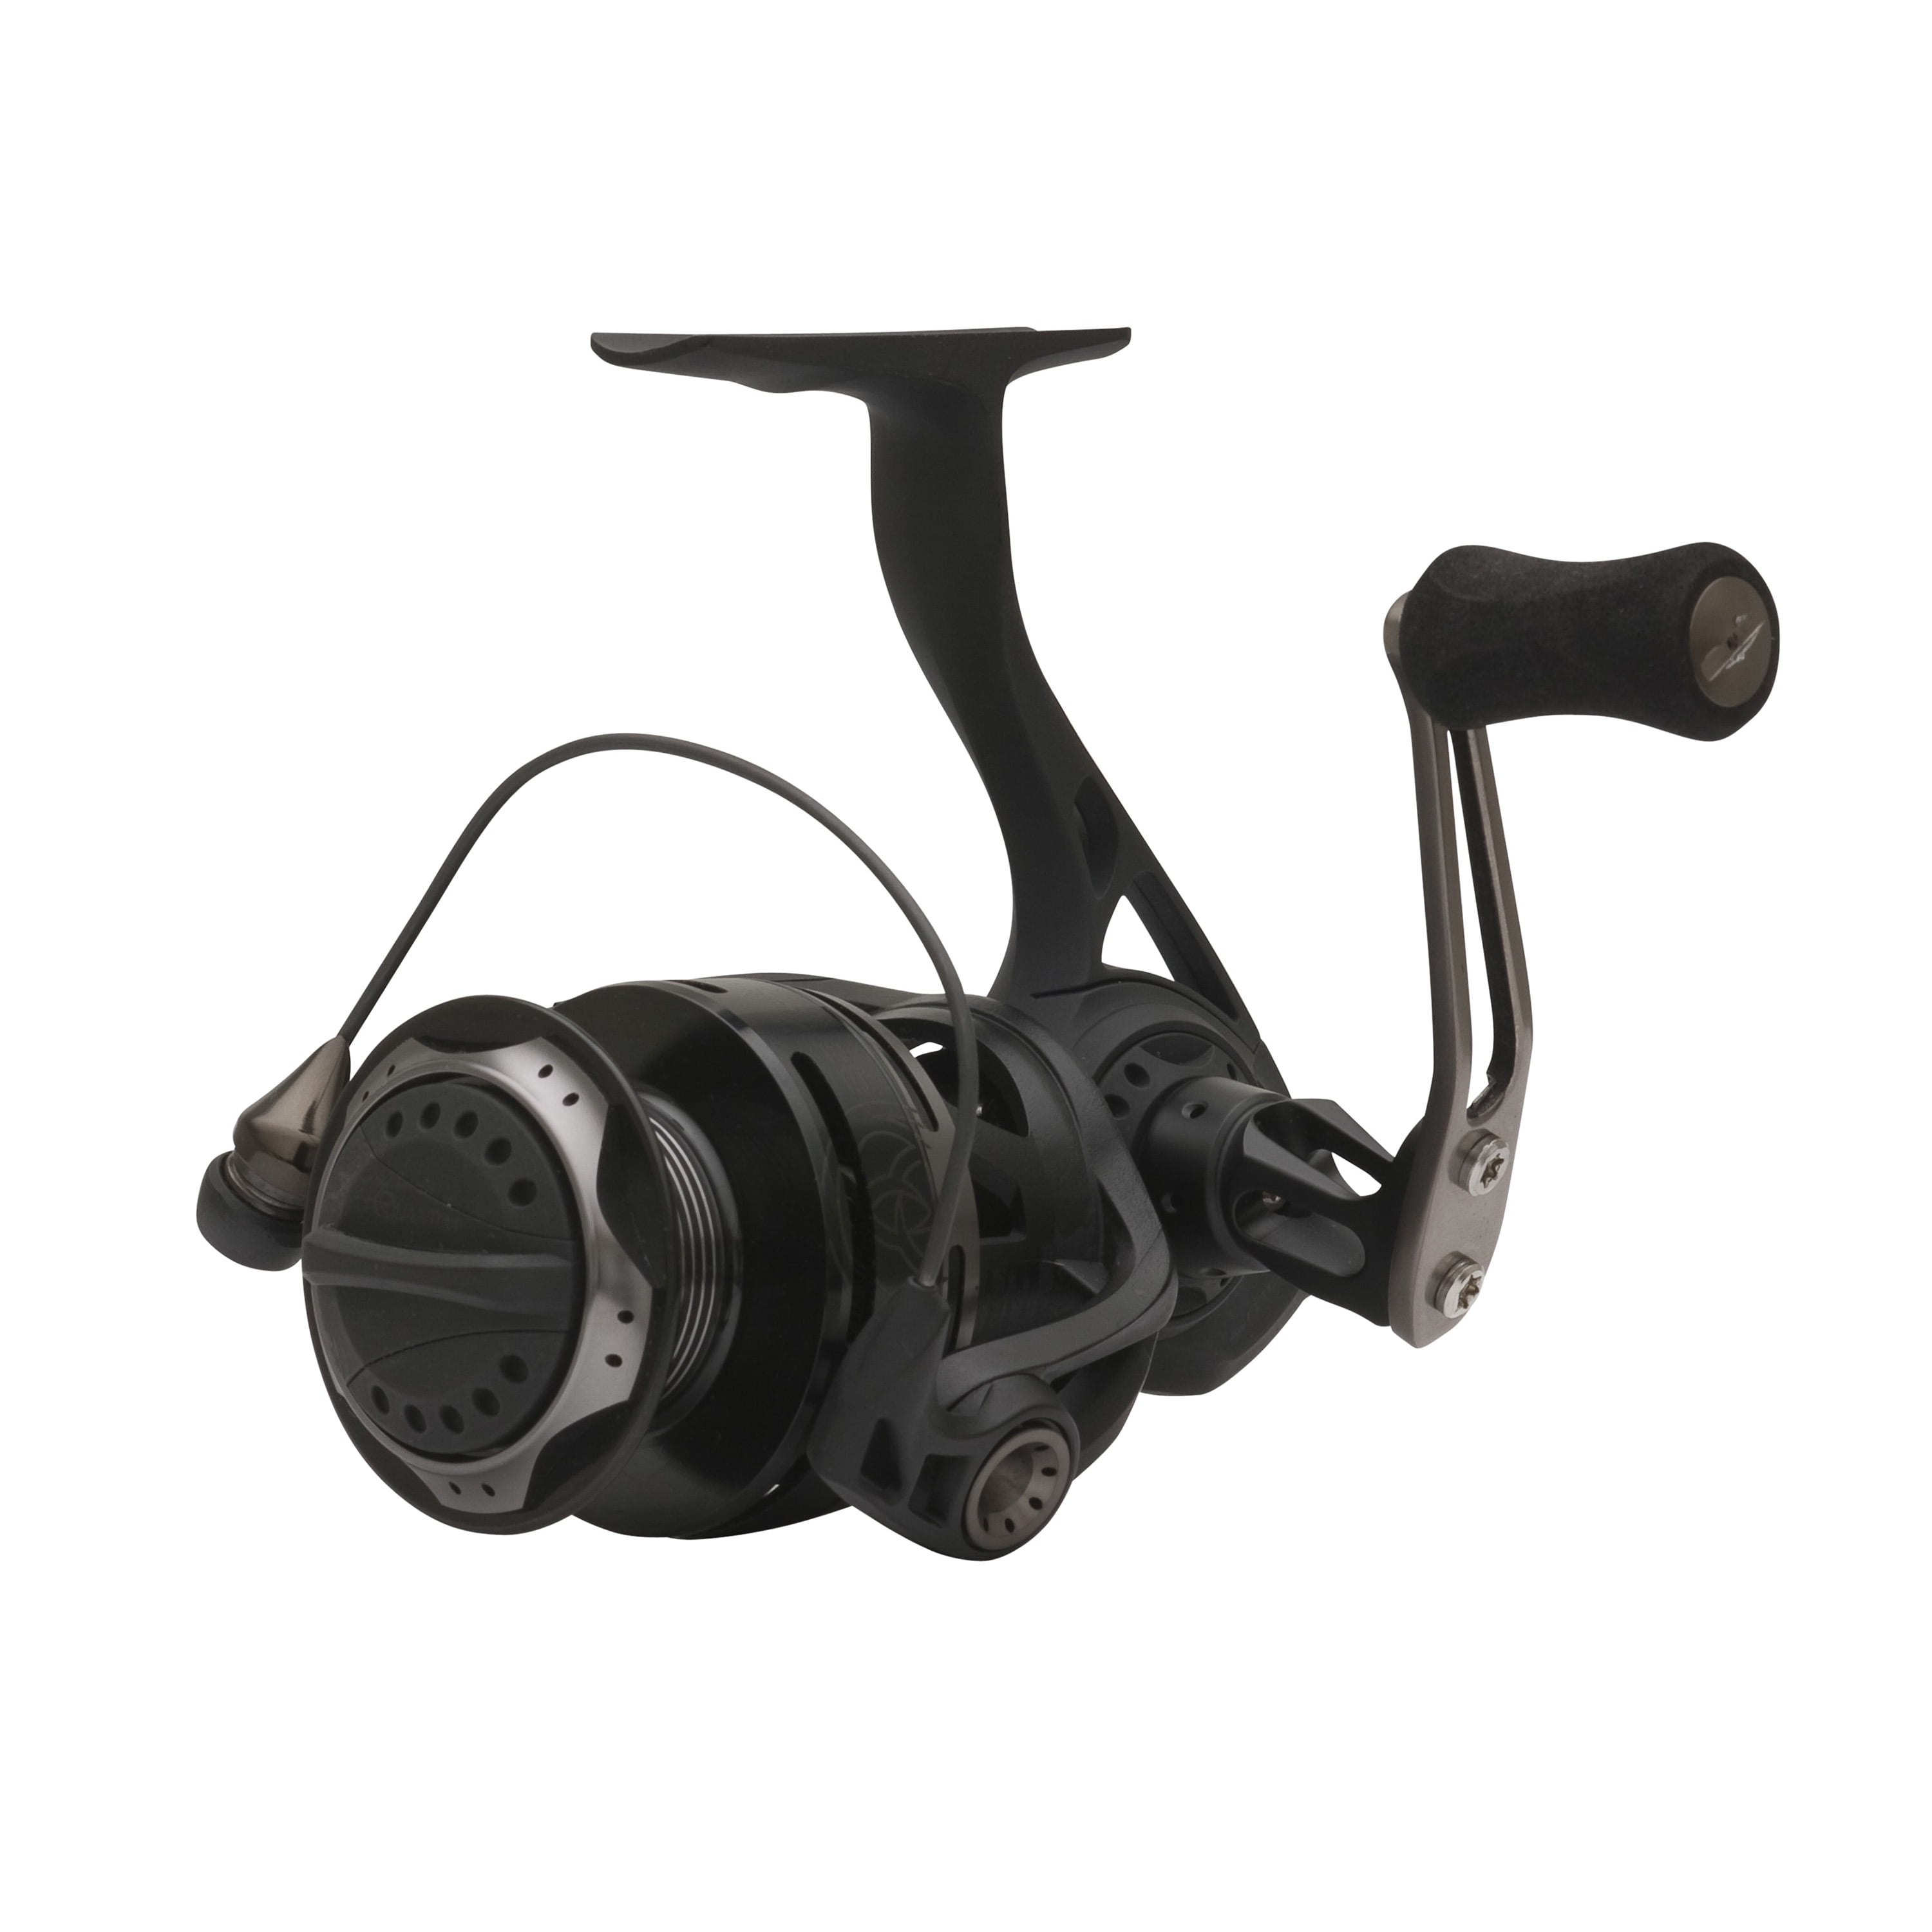 Quantum Smoke Spinning Fishing Reel, Size 15 Reel, Changeable Right- or  Left-Hand Retrieve, Continuous Anti-Reverse Clutch with NiTi Indestructible